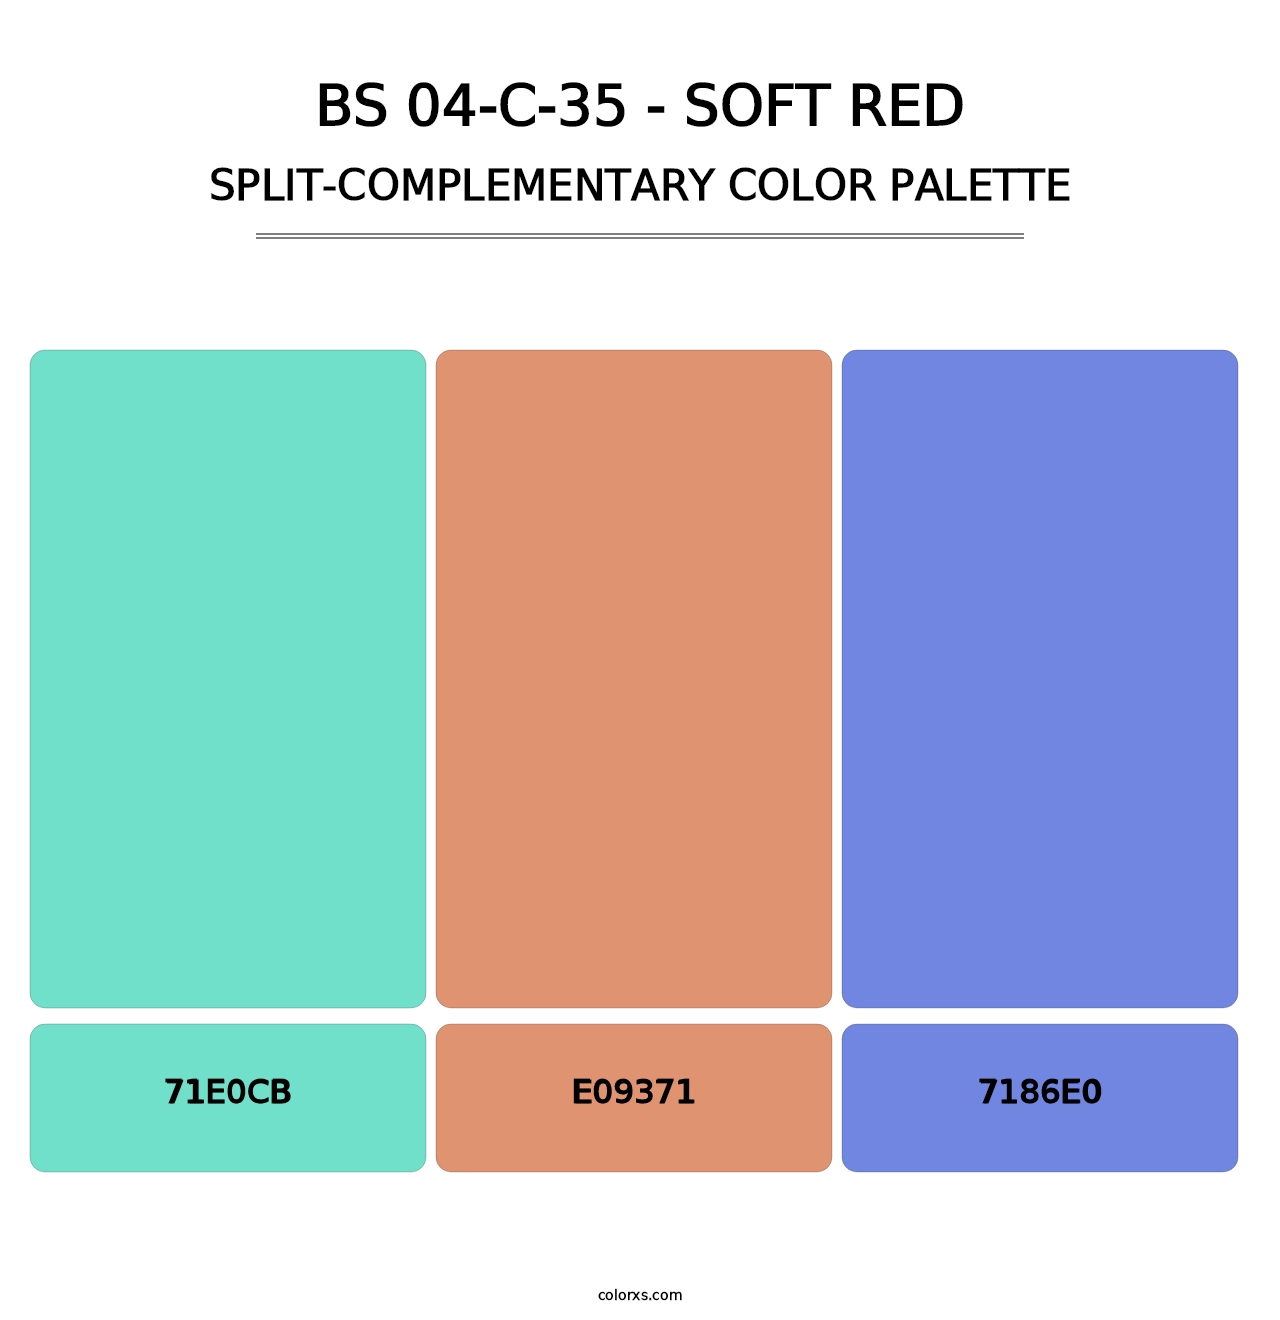 BS 04-C-35 - Soft Red - Split-Complementary Color Palette